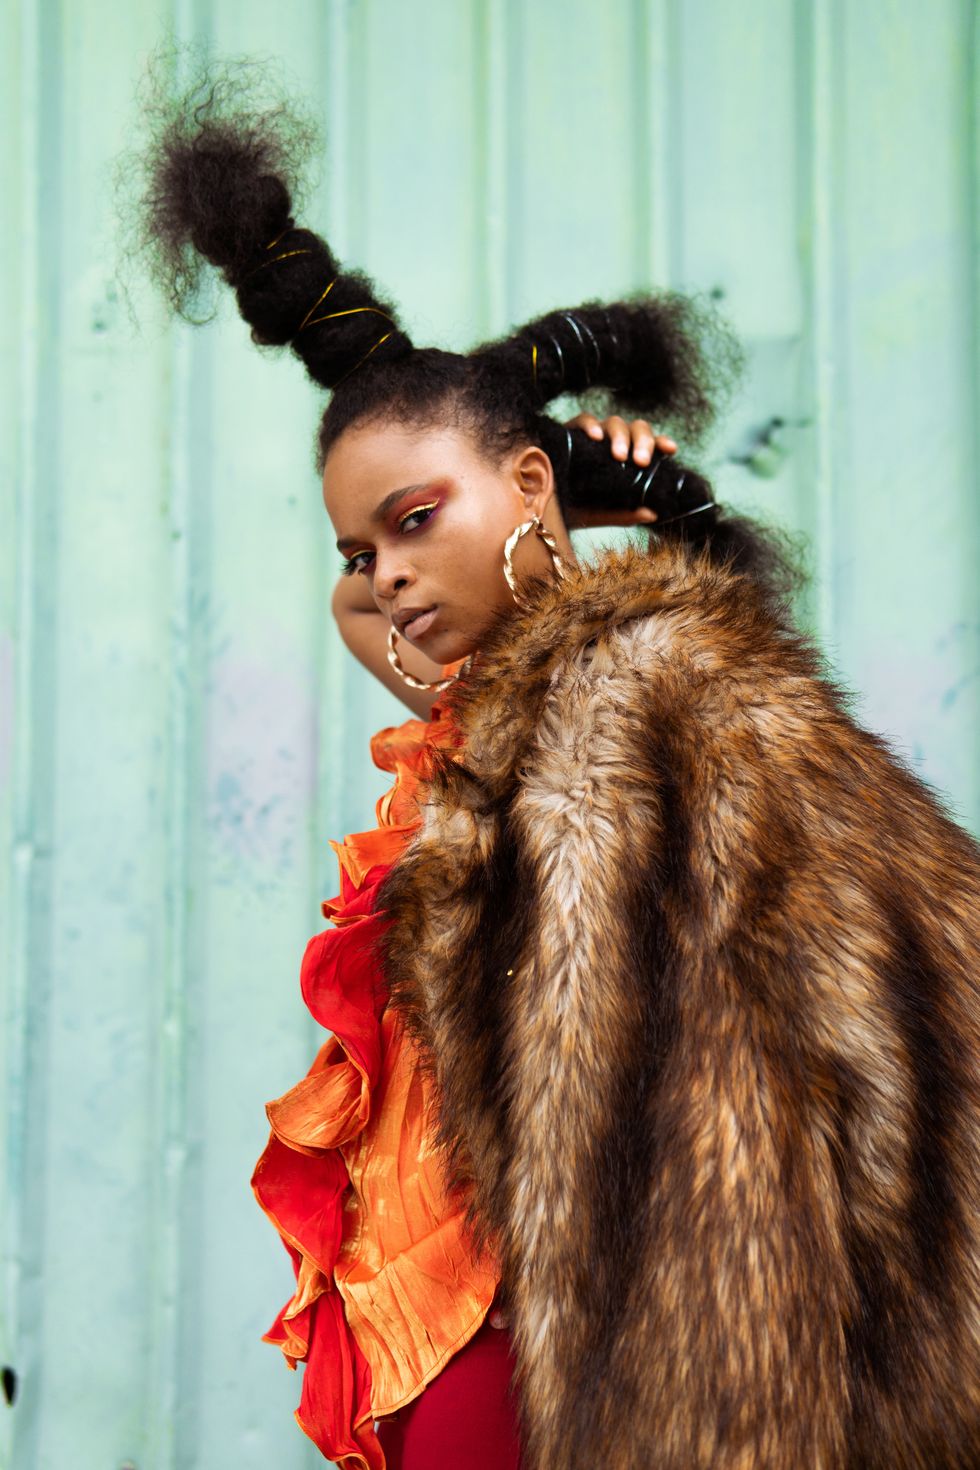 Lila Iké Is Blooming Into the Powerful New Voice of Jamaican Music